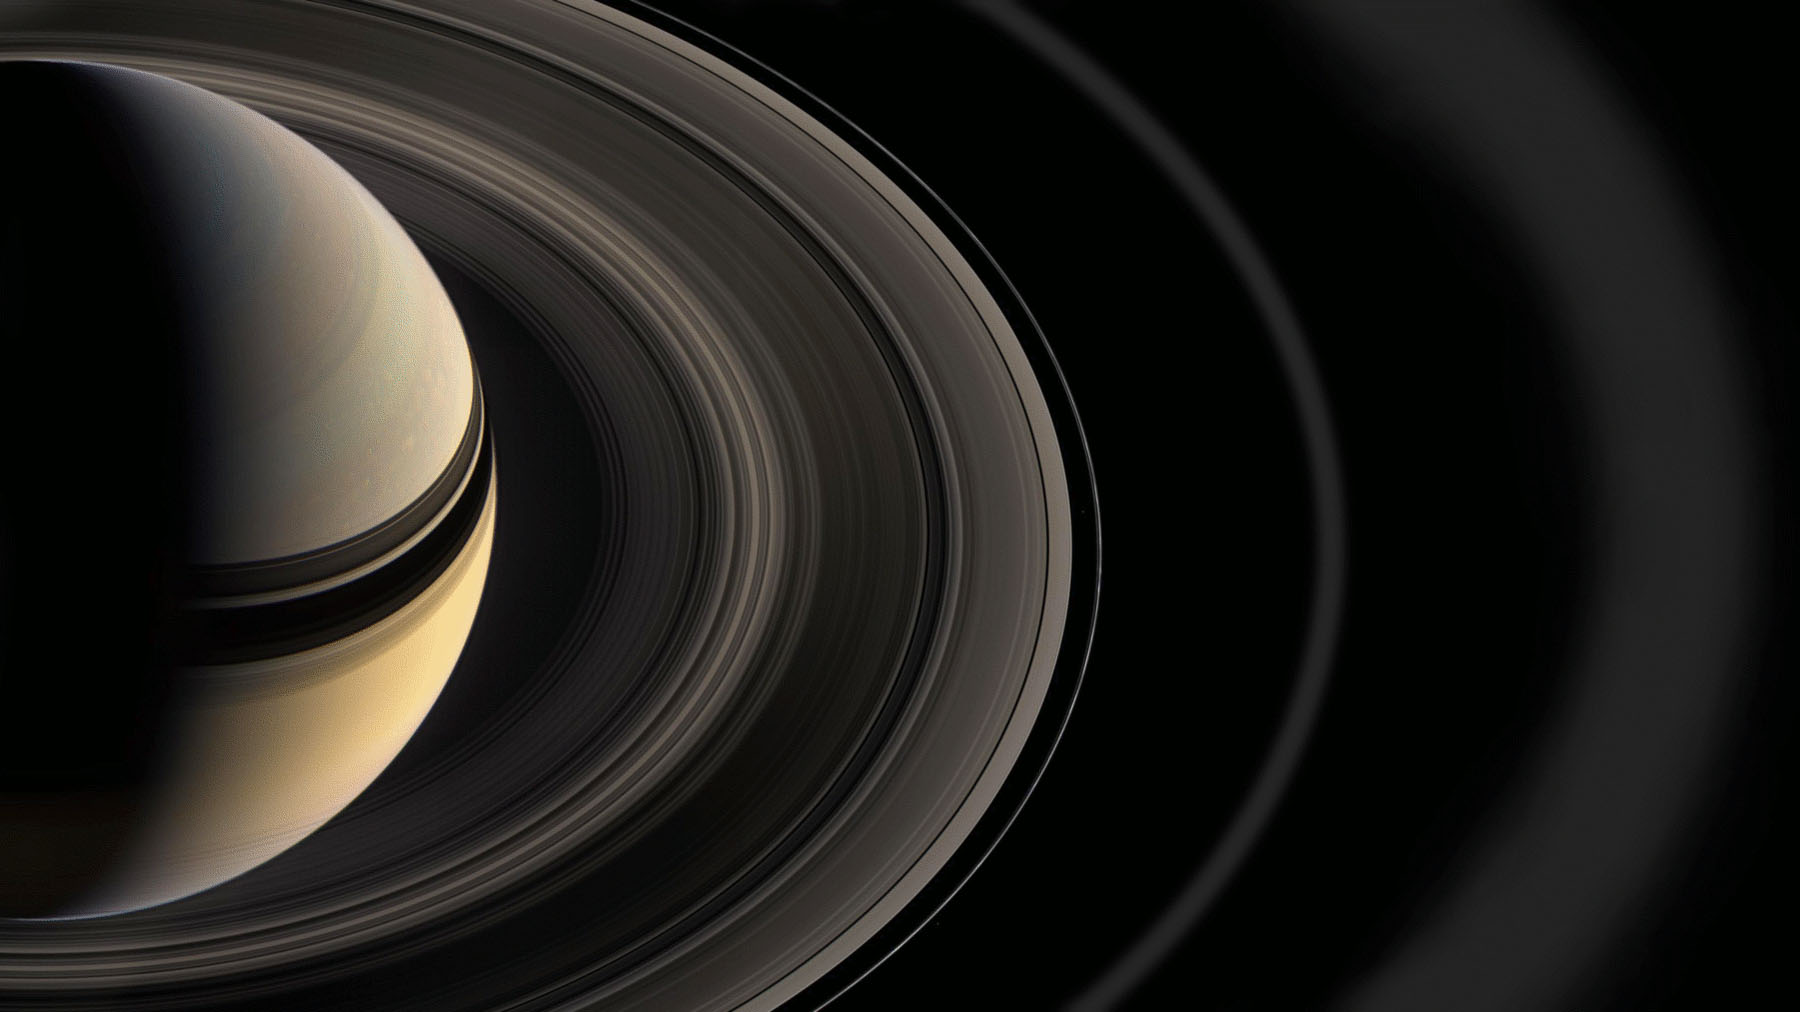 NASA missions find Saturn's rings are heating the planet's atmosphere - CGTN